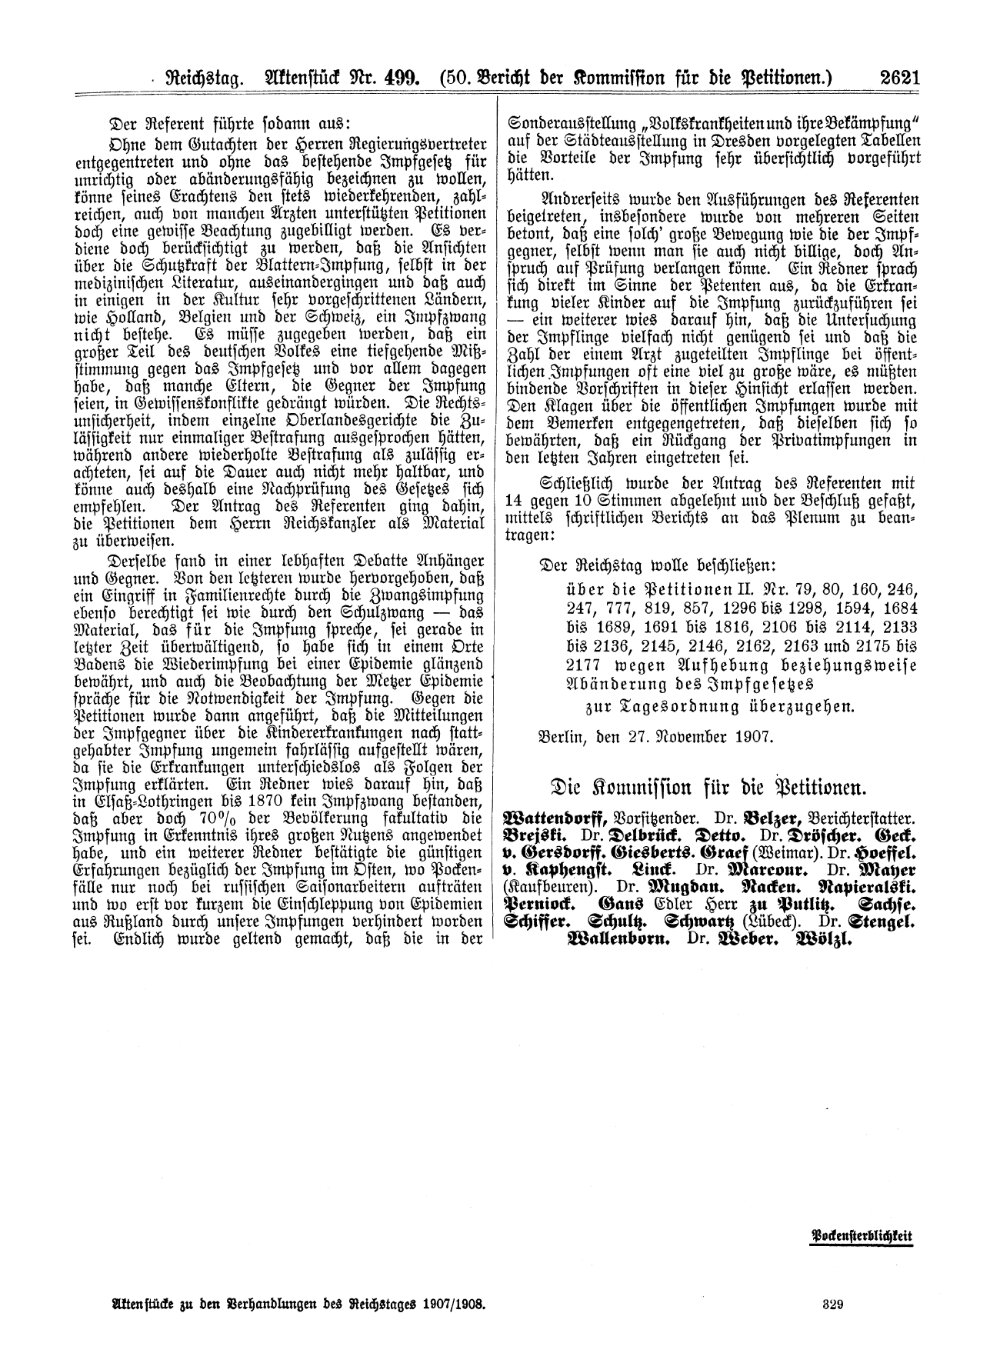 Scan of page 2621